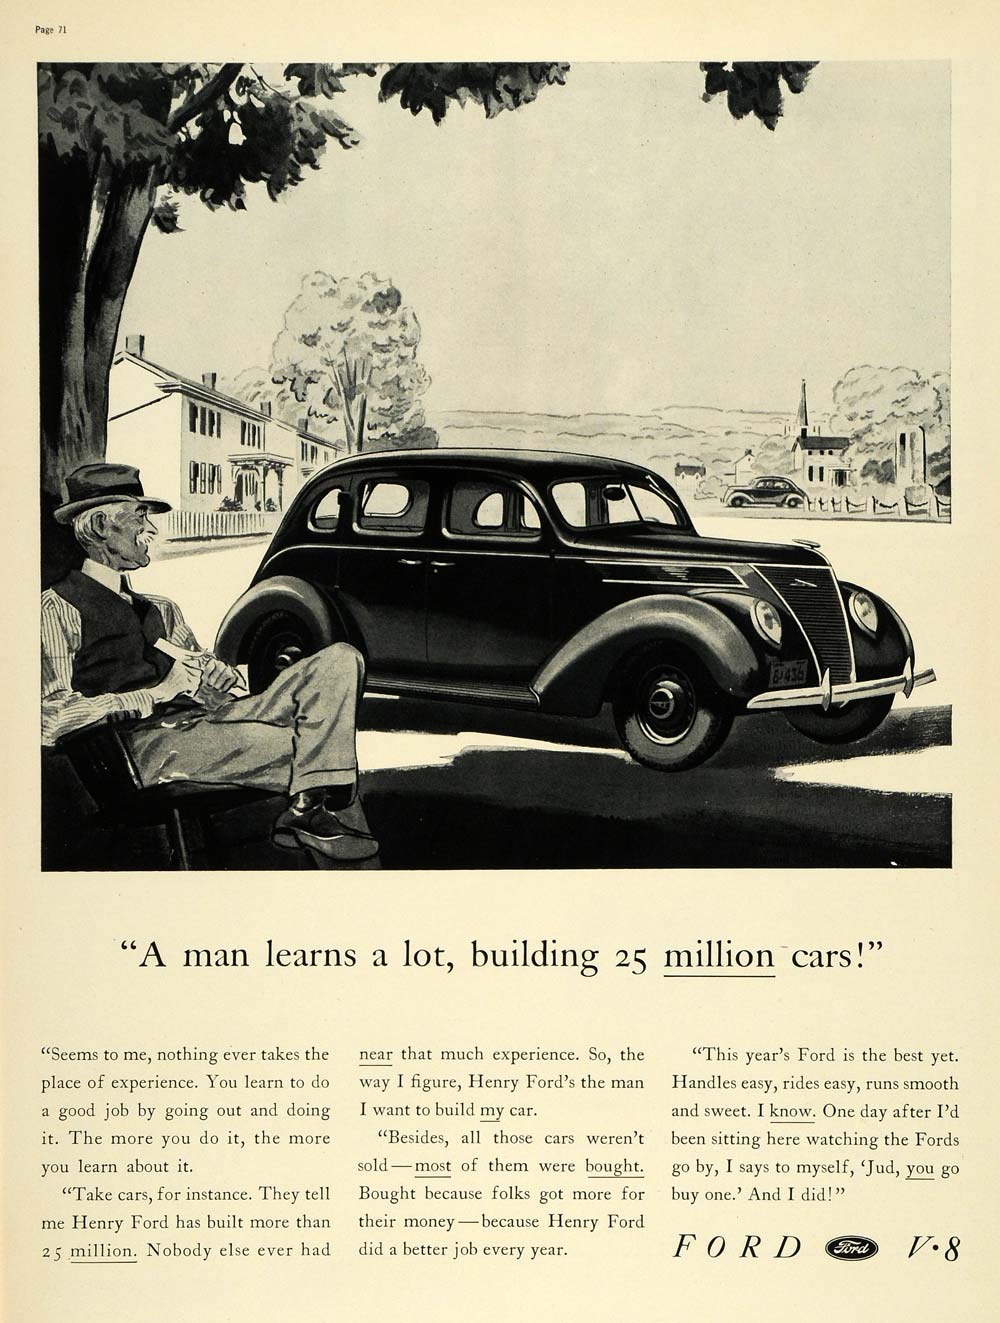 1937 Ad Vintage V8 Henry Ford Automobiles Jud Southern Relaxation Small LF3